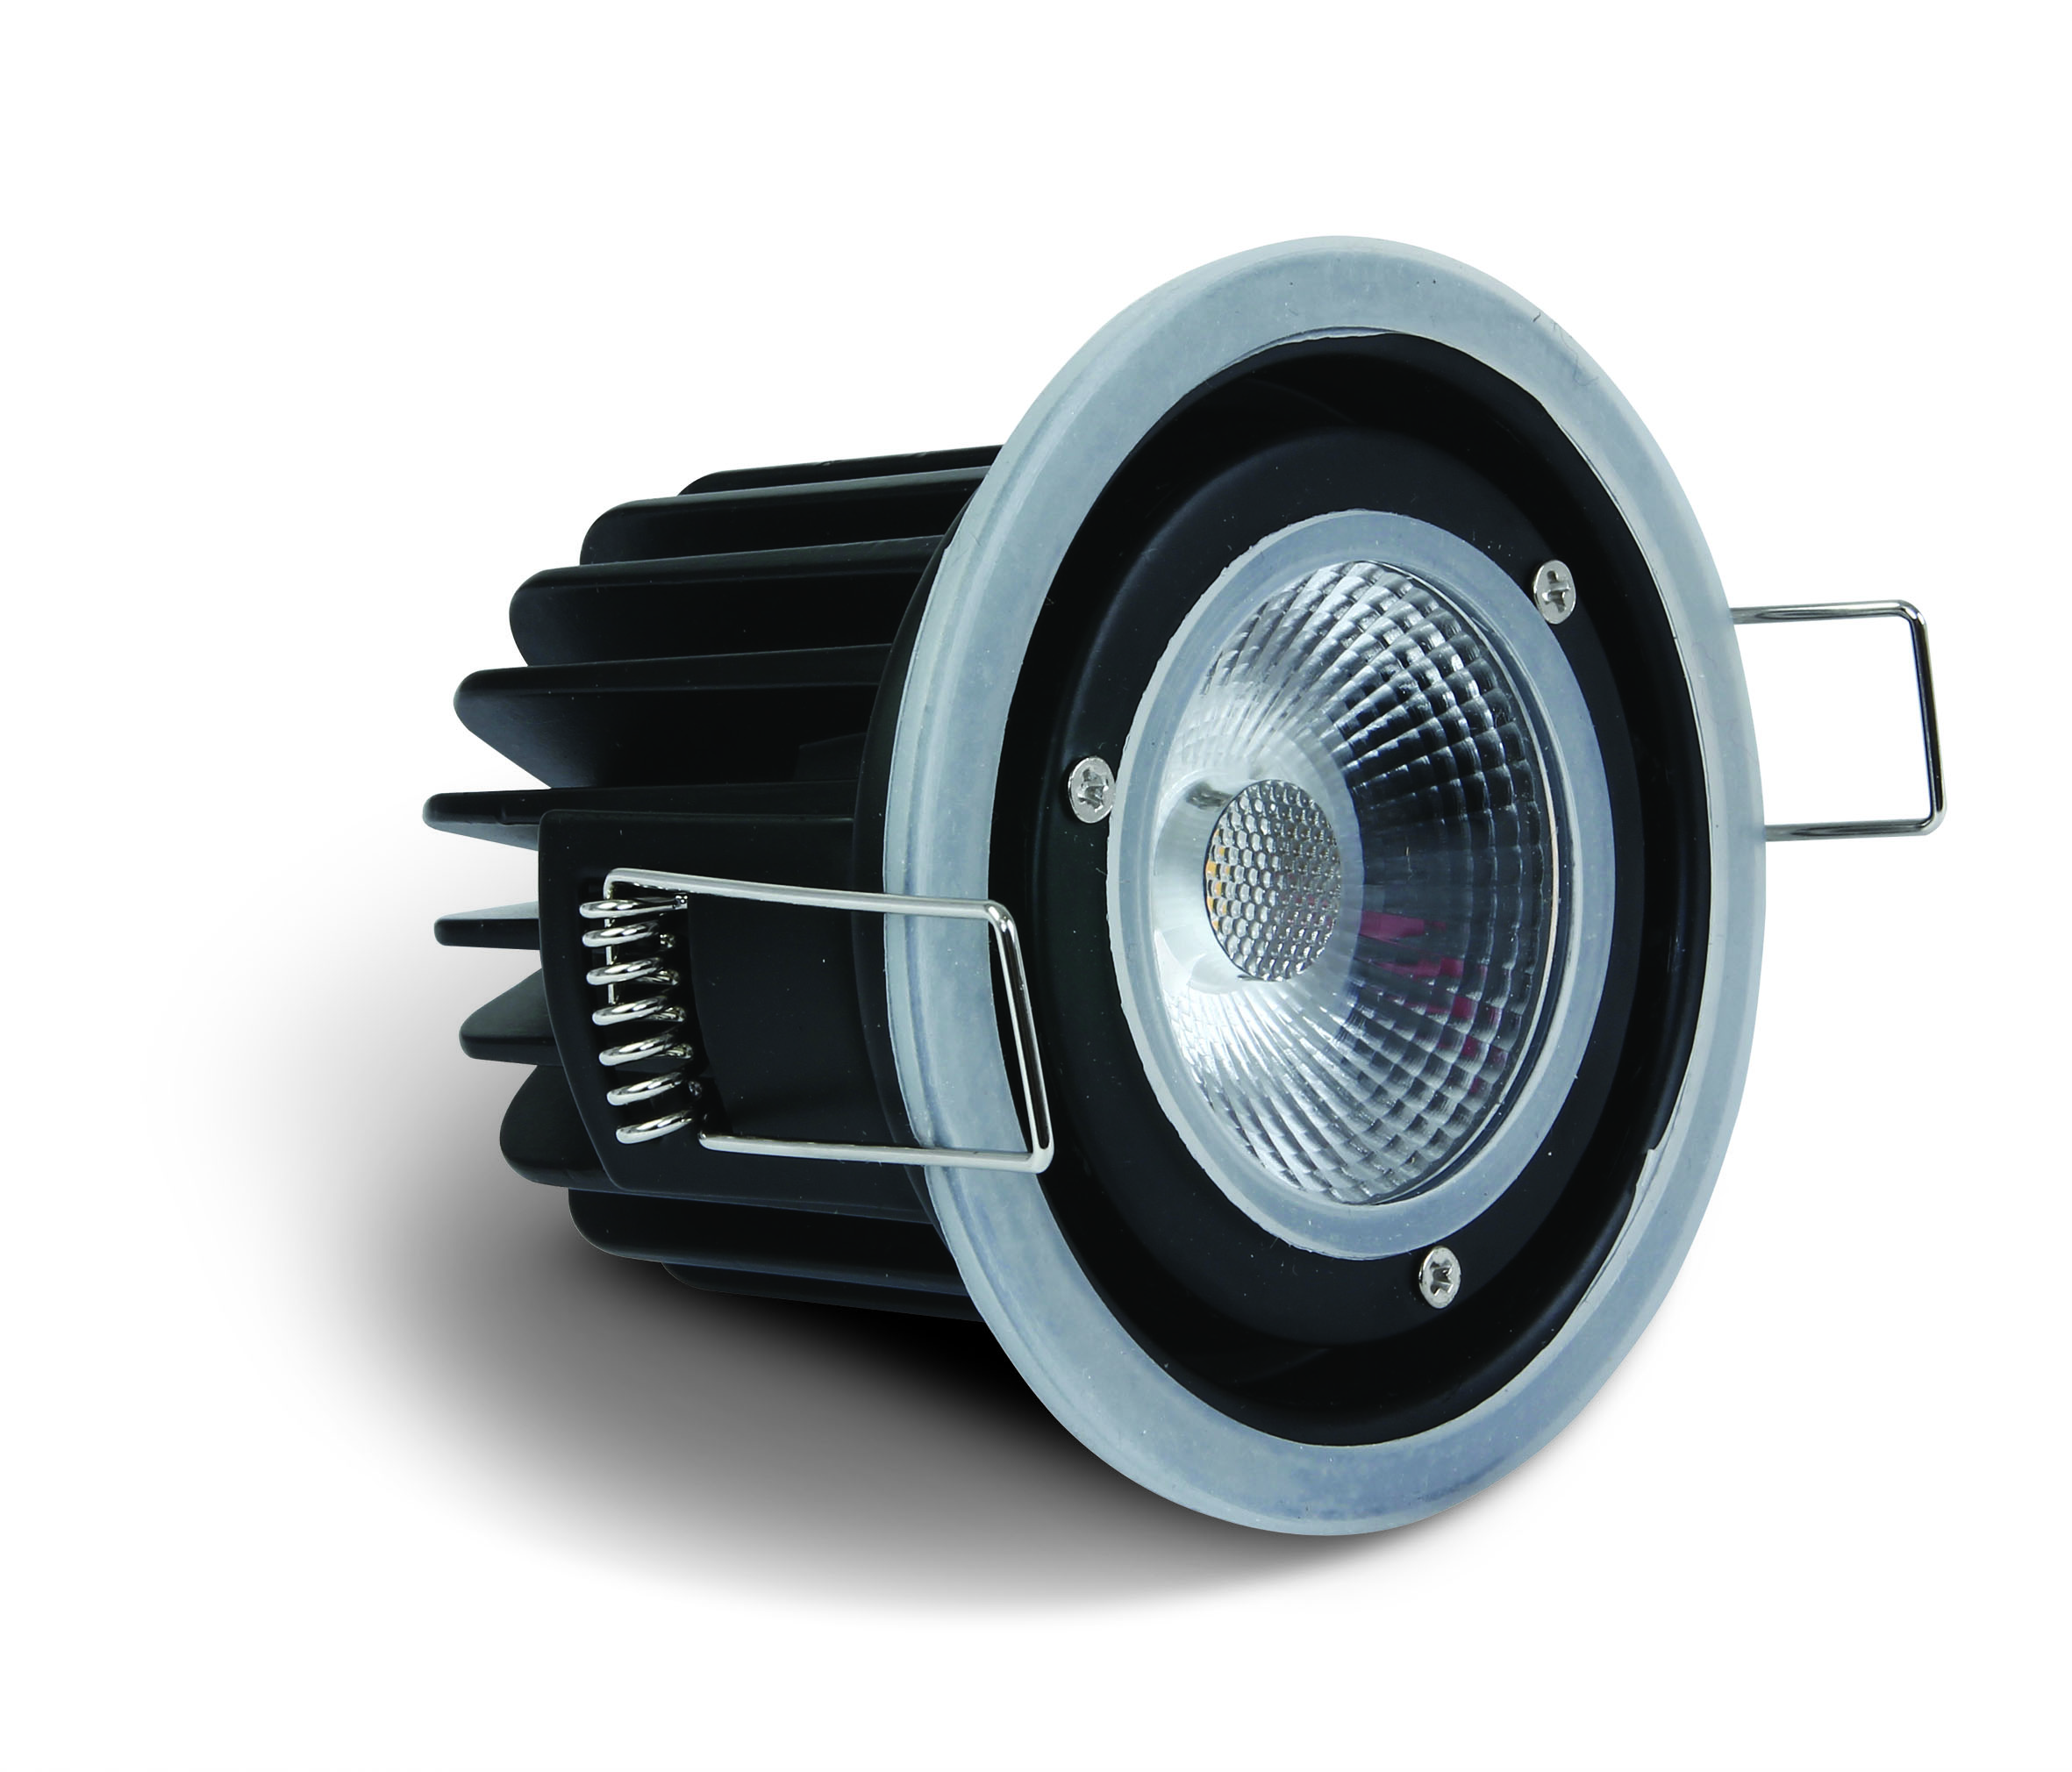 Nora F LED 6W 500lm 3000K, 350mA 40° IP65 Fire rated